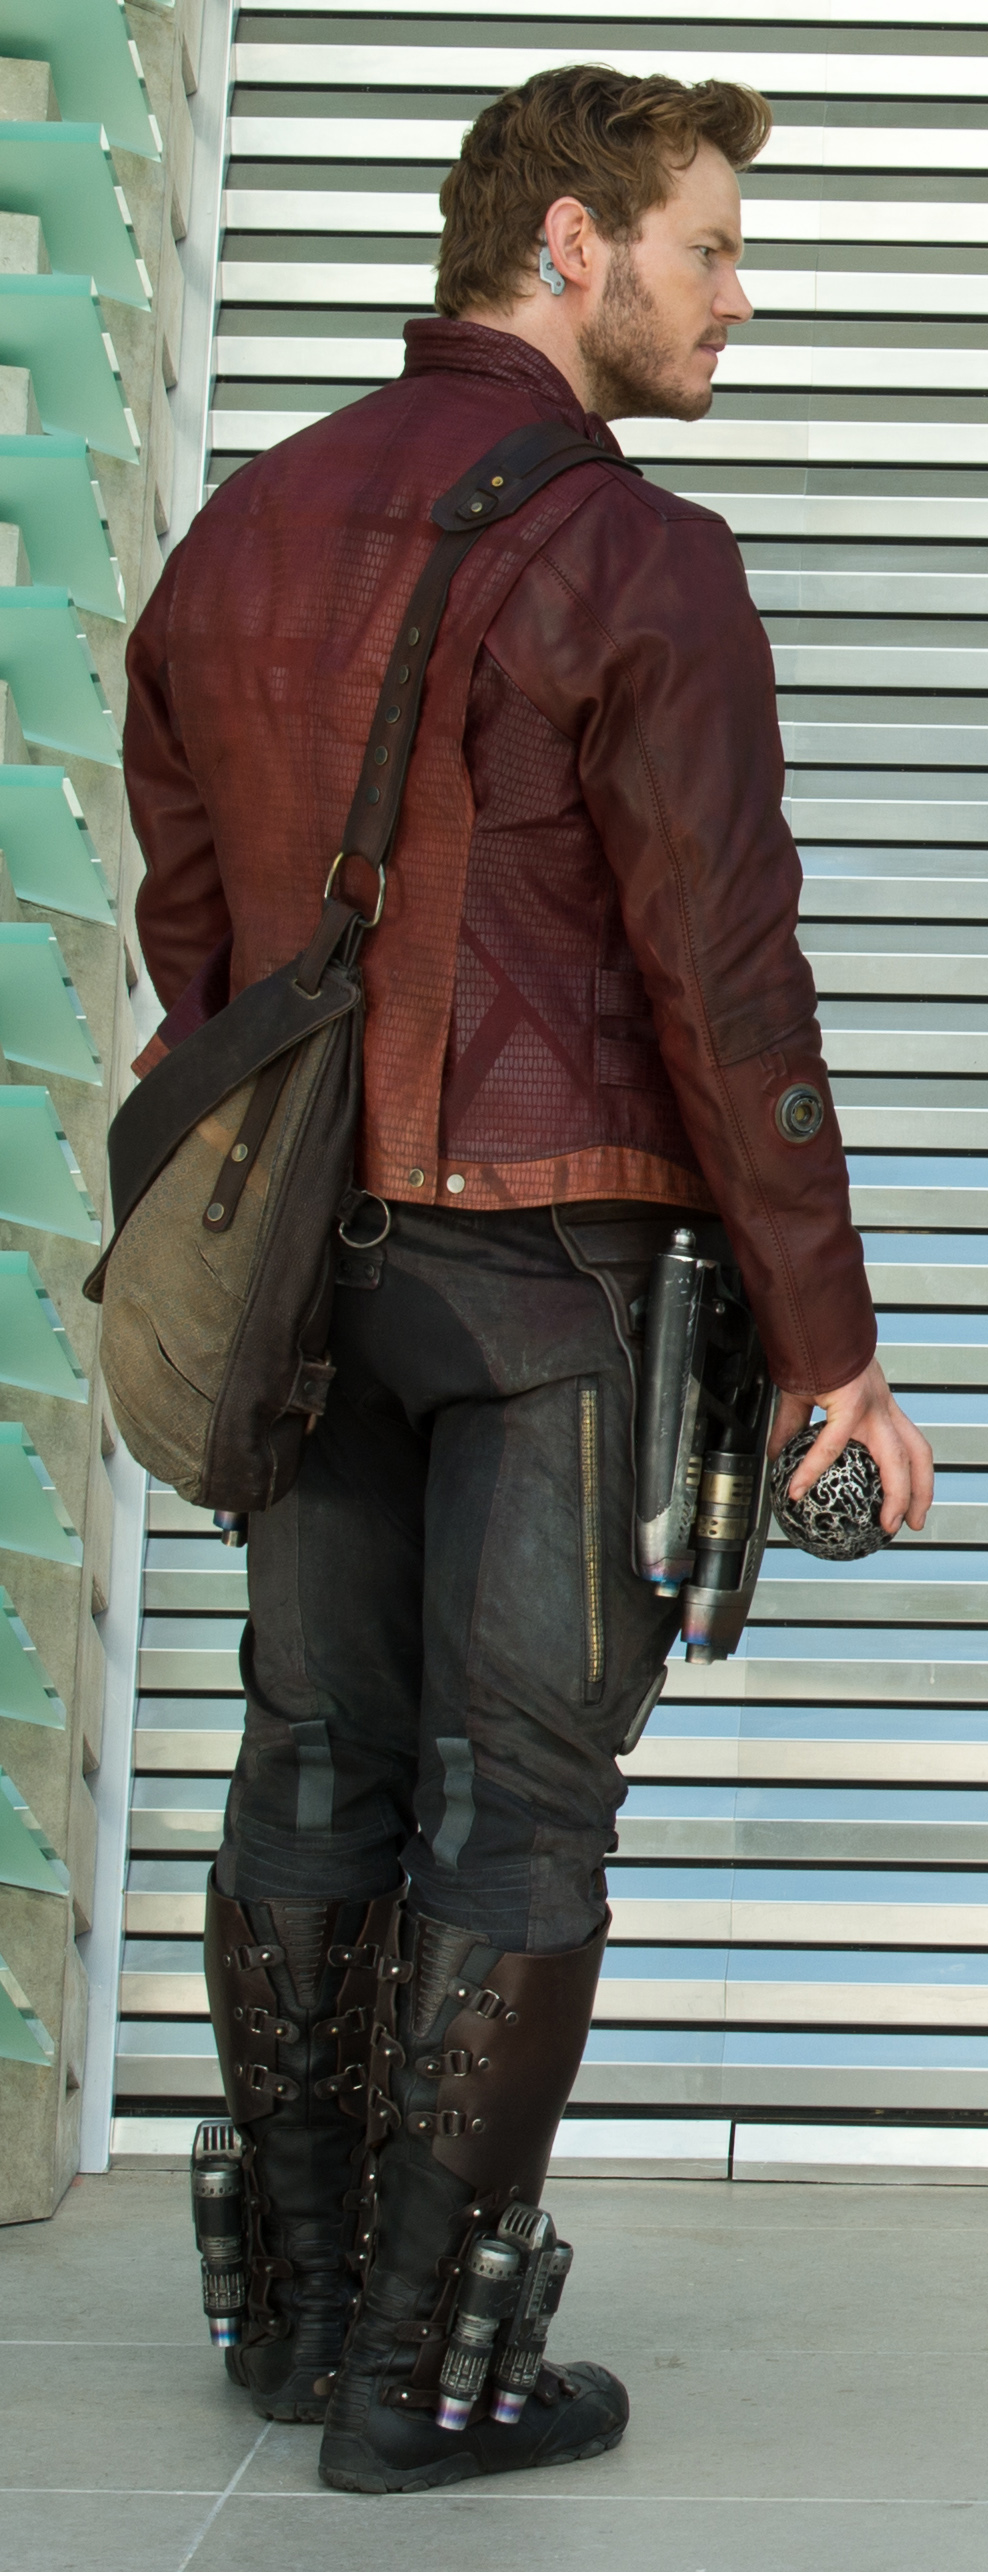 The Definitive Peter Quill/Star-Lord Costume Thread | Page 2 | RPF Costume  and Prop Maker Community